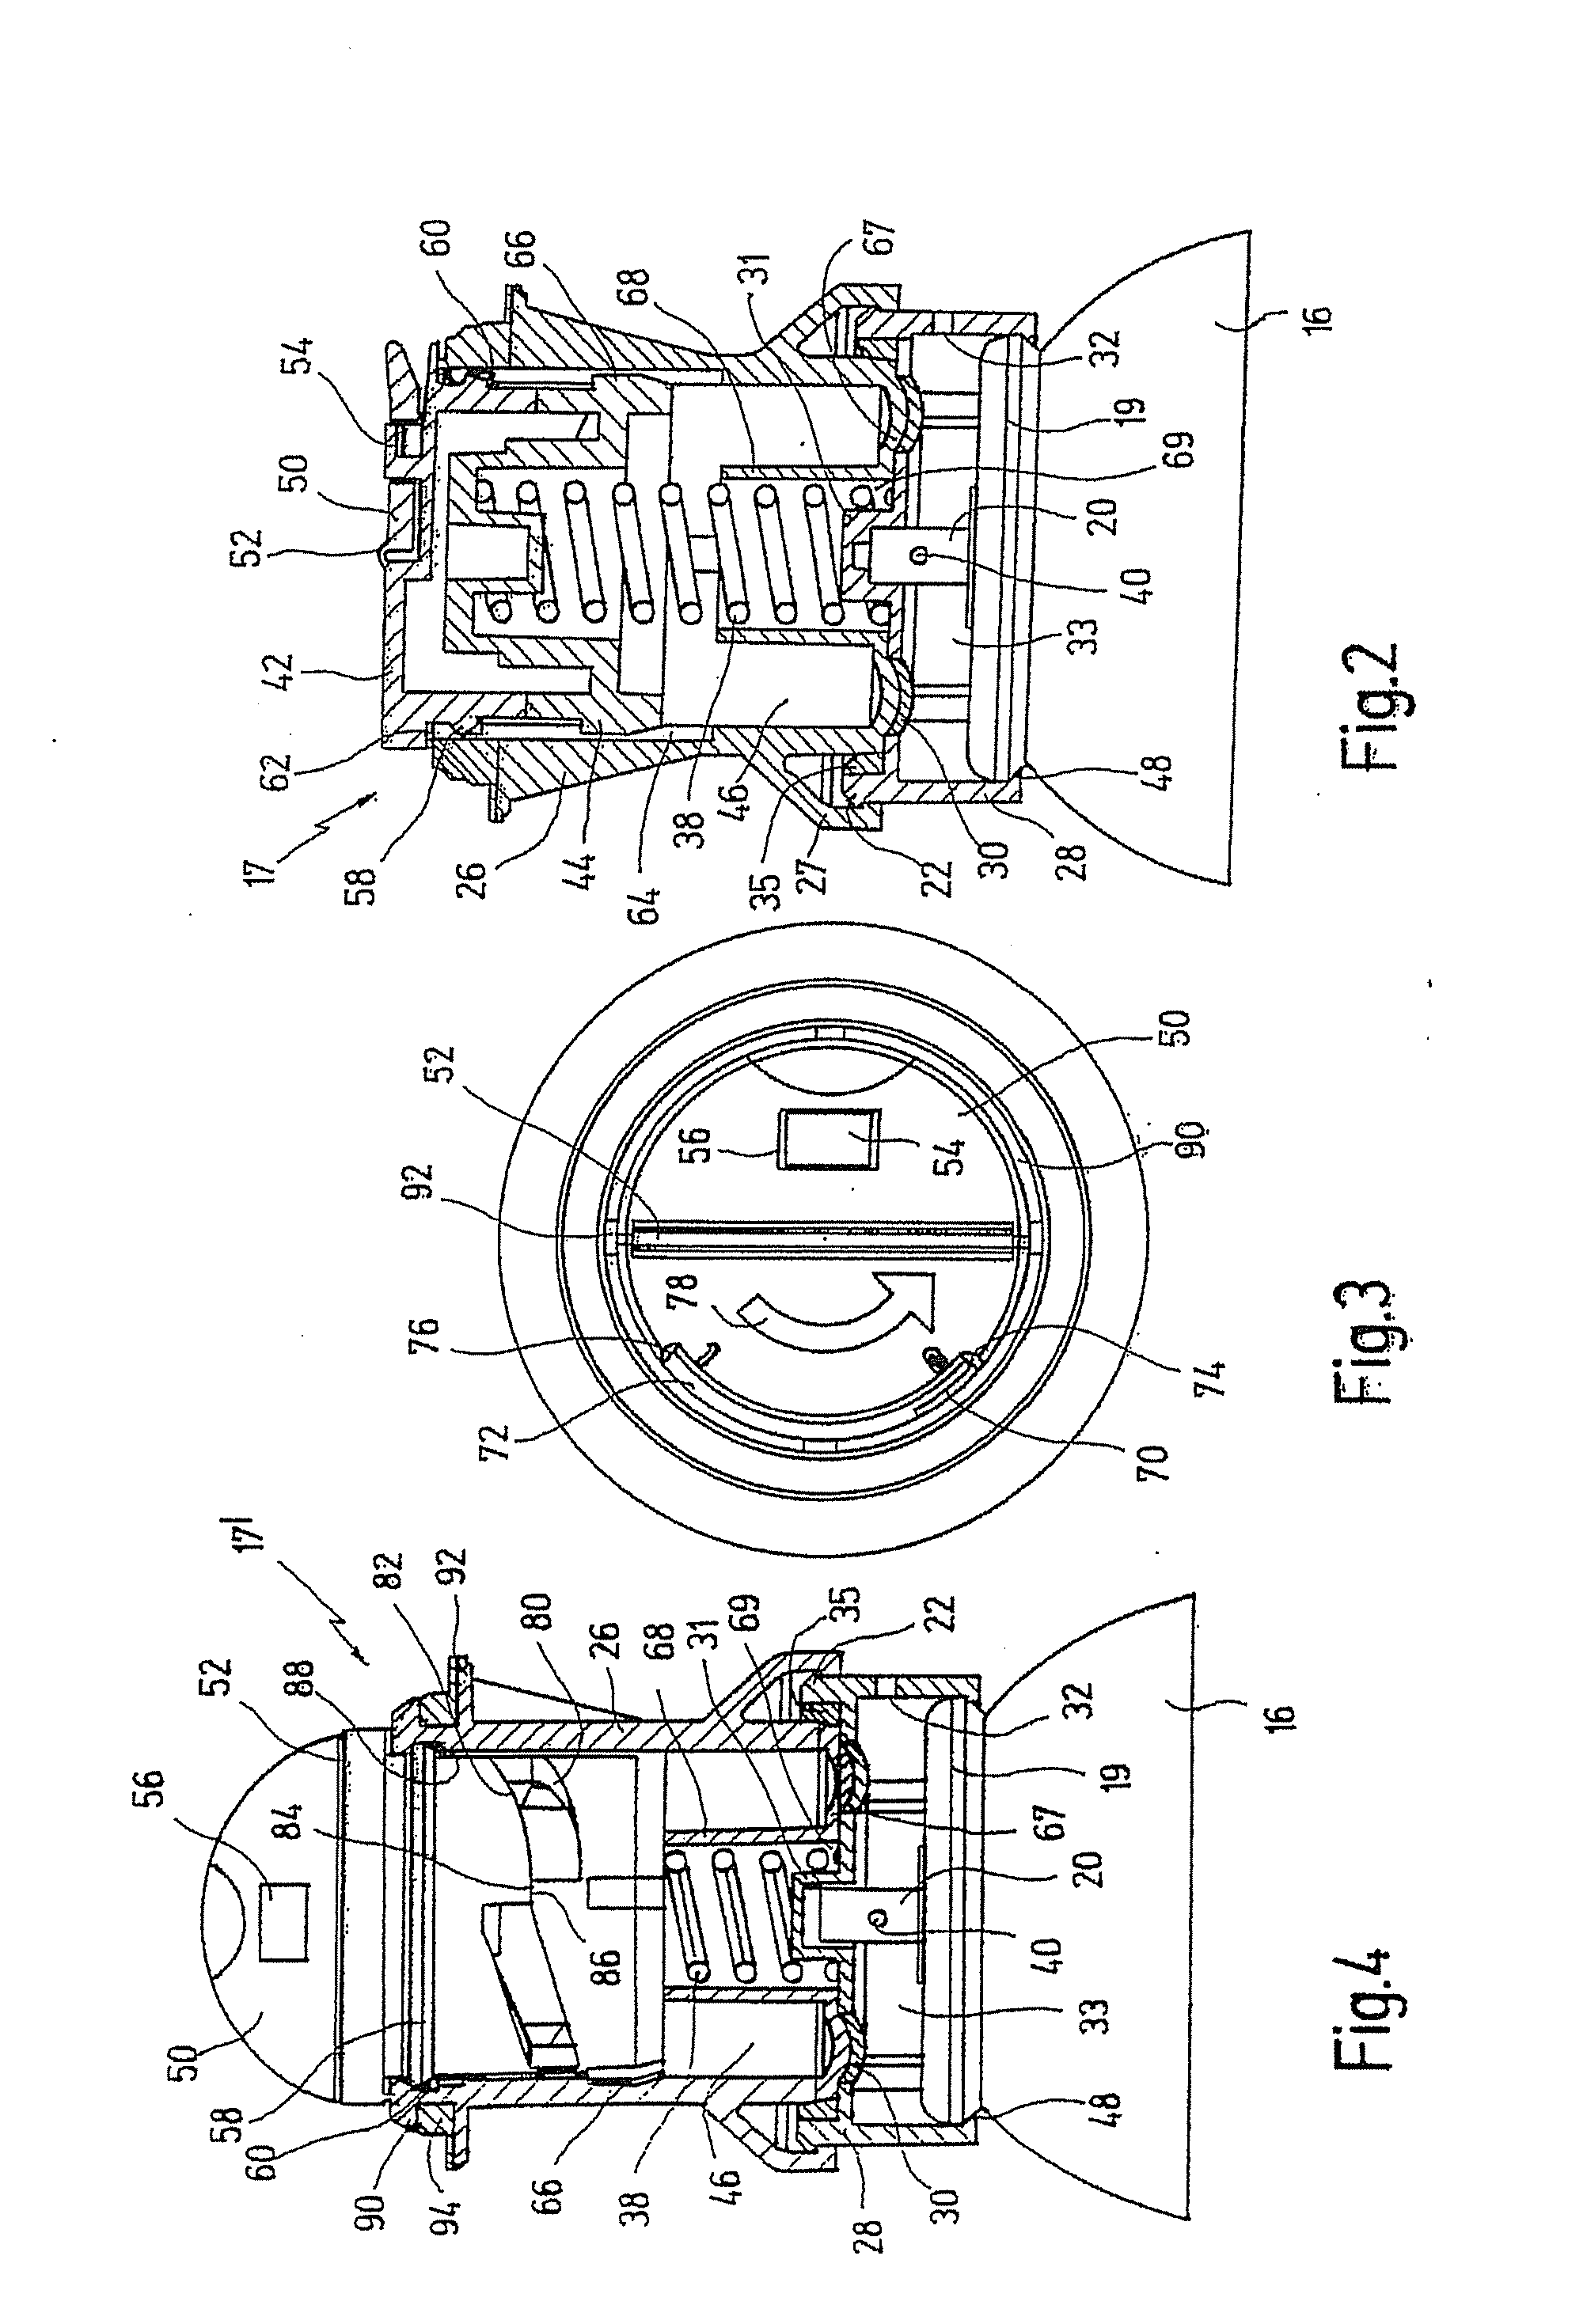 Device for Dispensing a Fluid from the Hollow Space of a Container